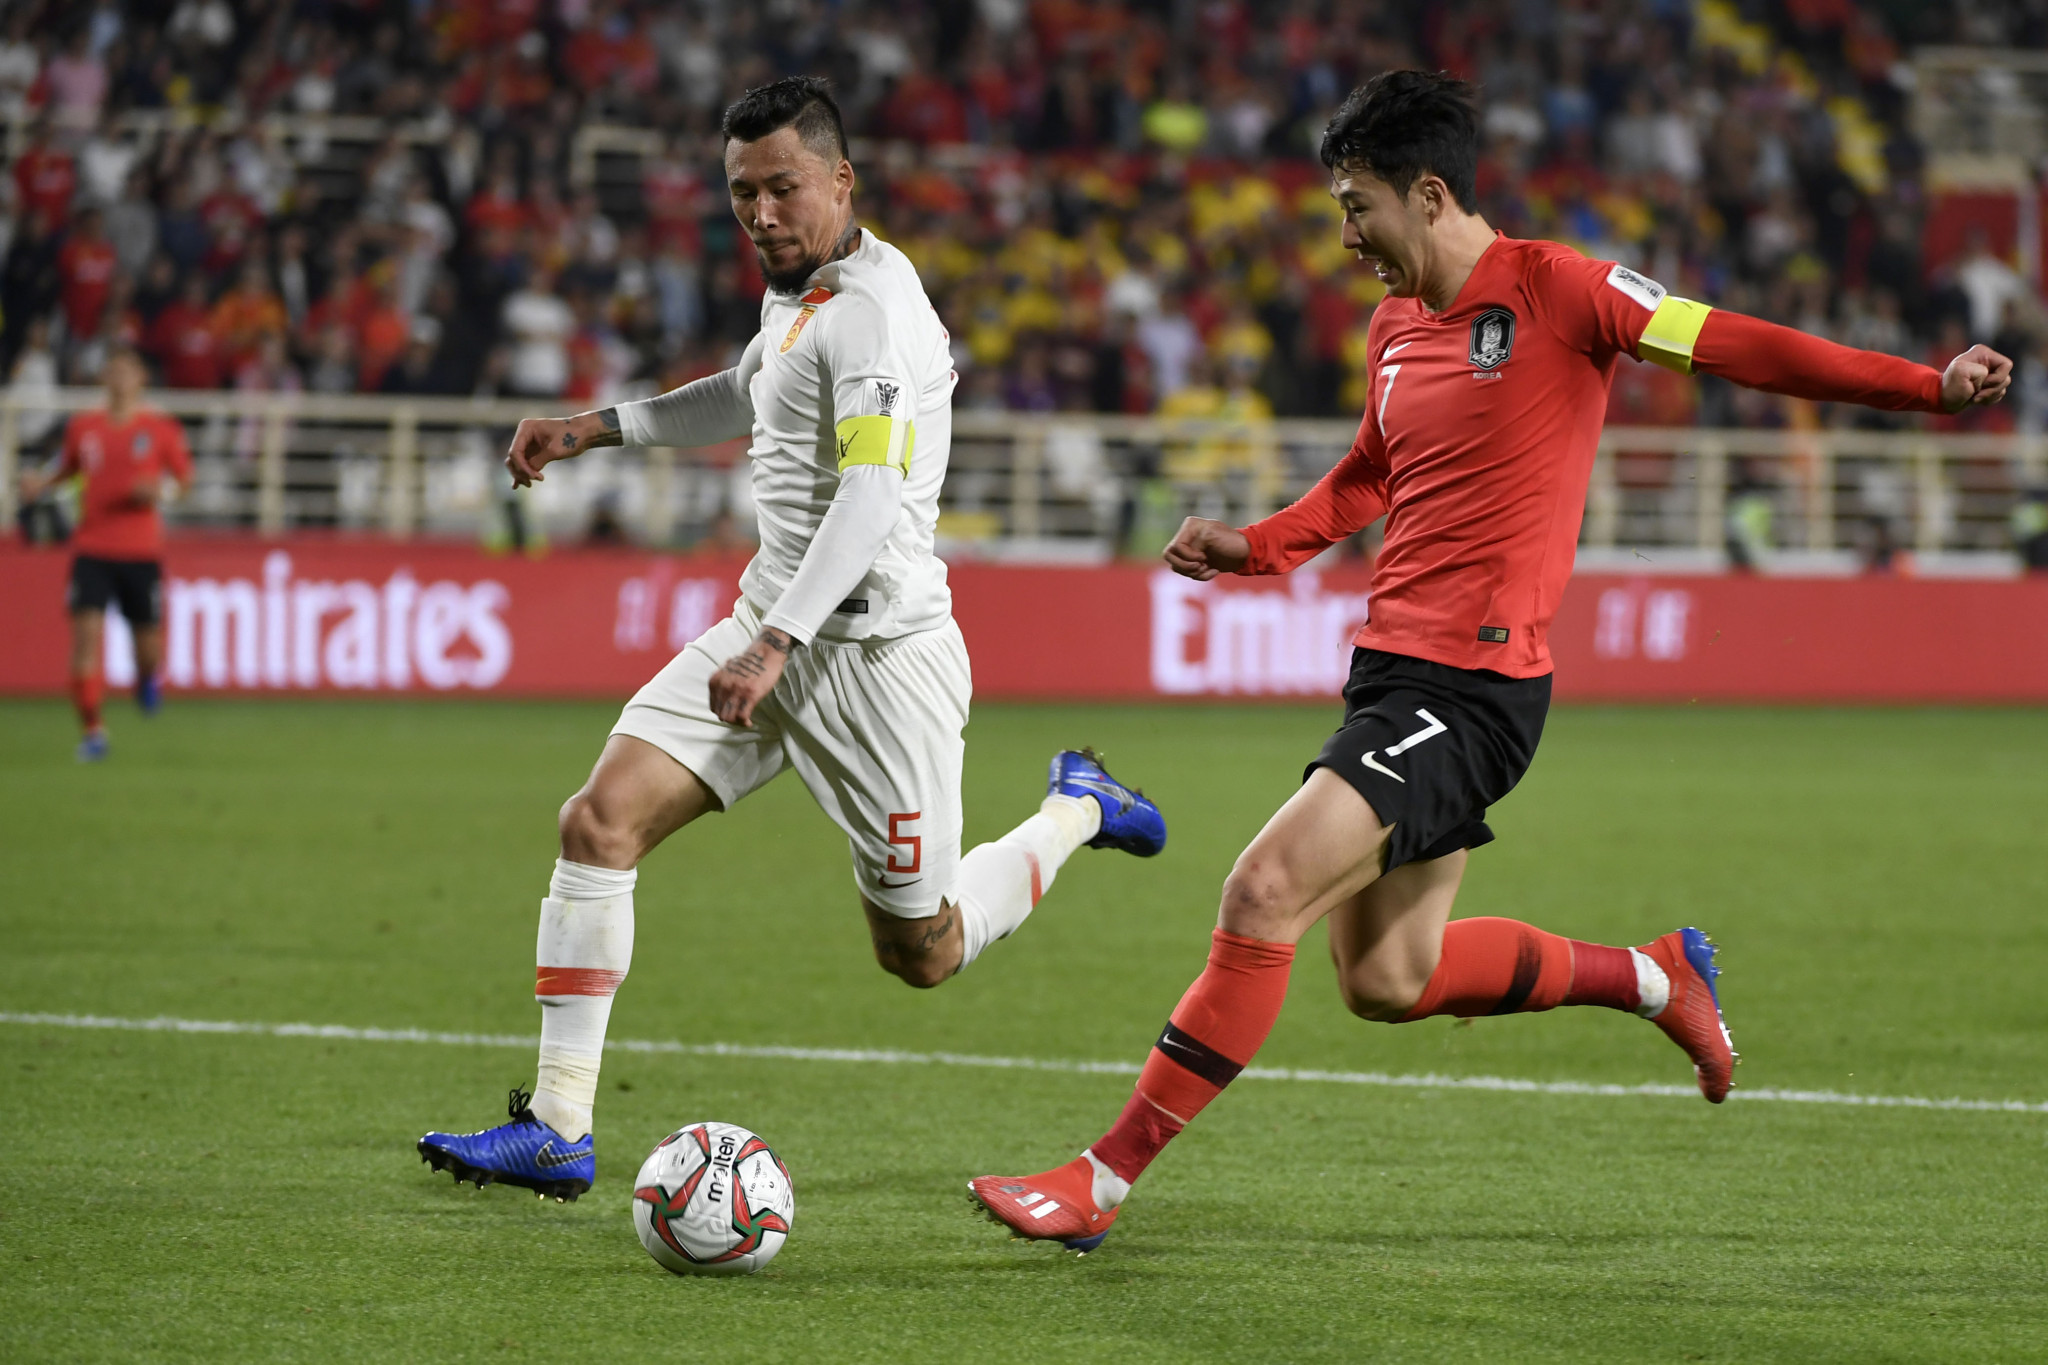 South Korea were boosted by the addition of Son Heung-min to the team, with the striker captaining his side to a 2-0 victory over China at the AFC Asian Cup ©Getty Images